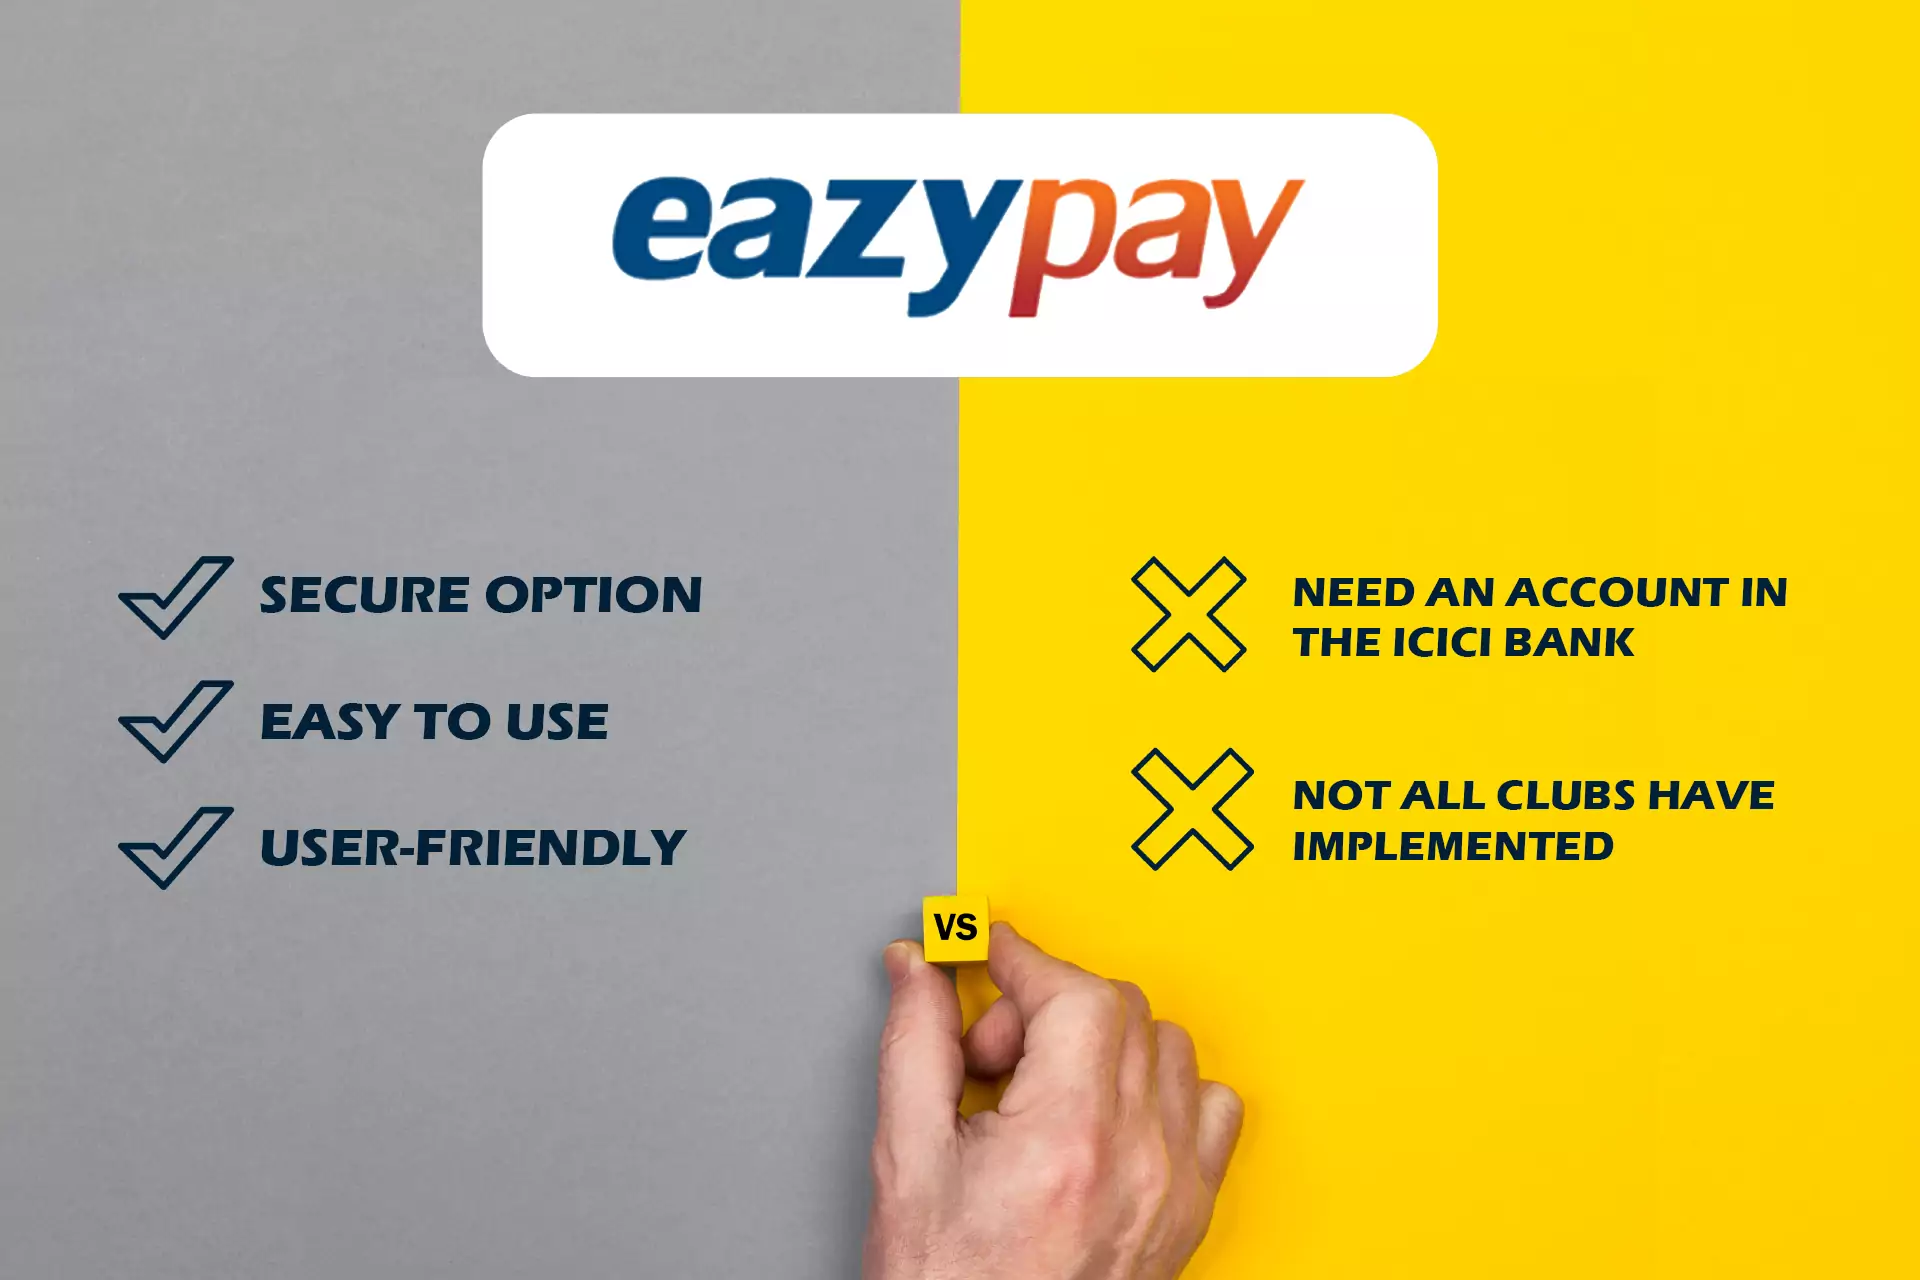 Think about the pros and cons of using Eazypay before registration.